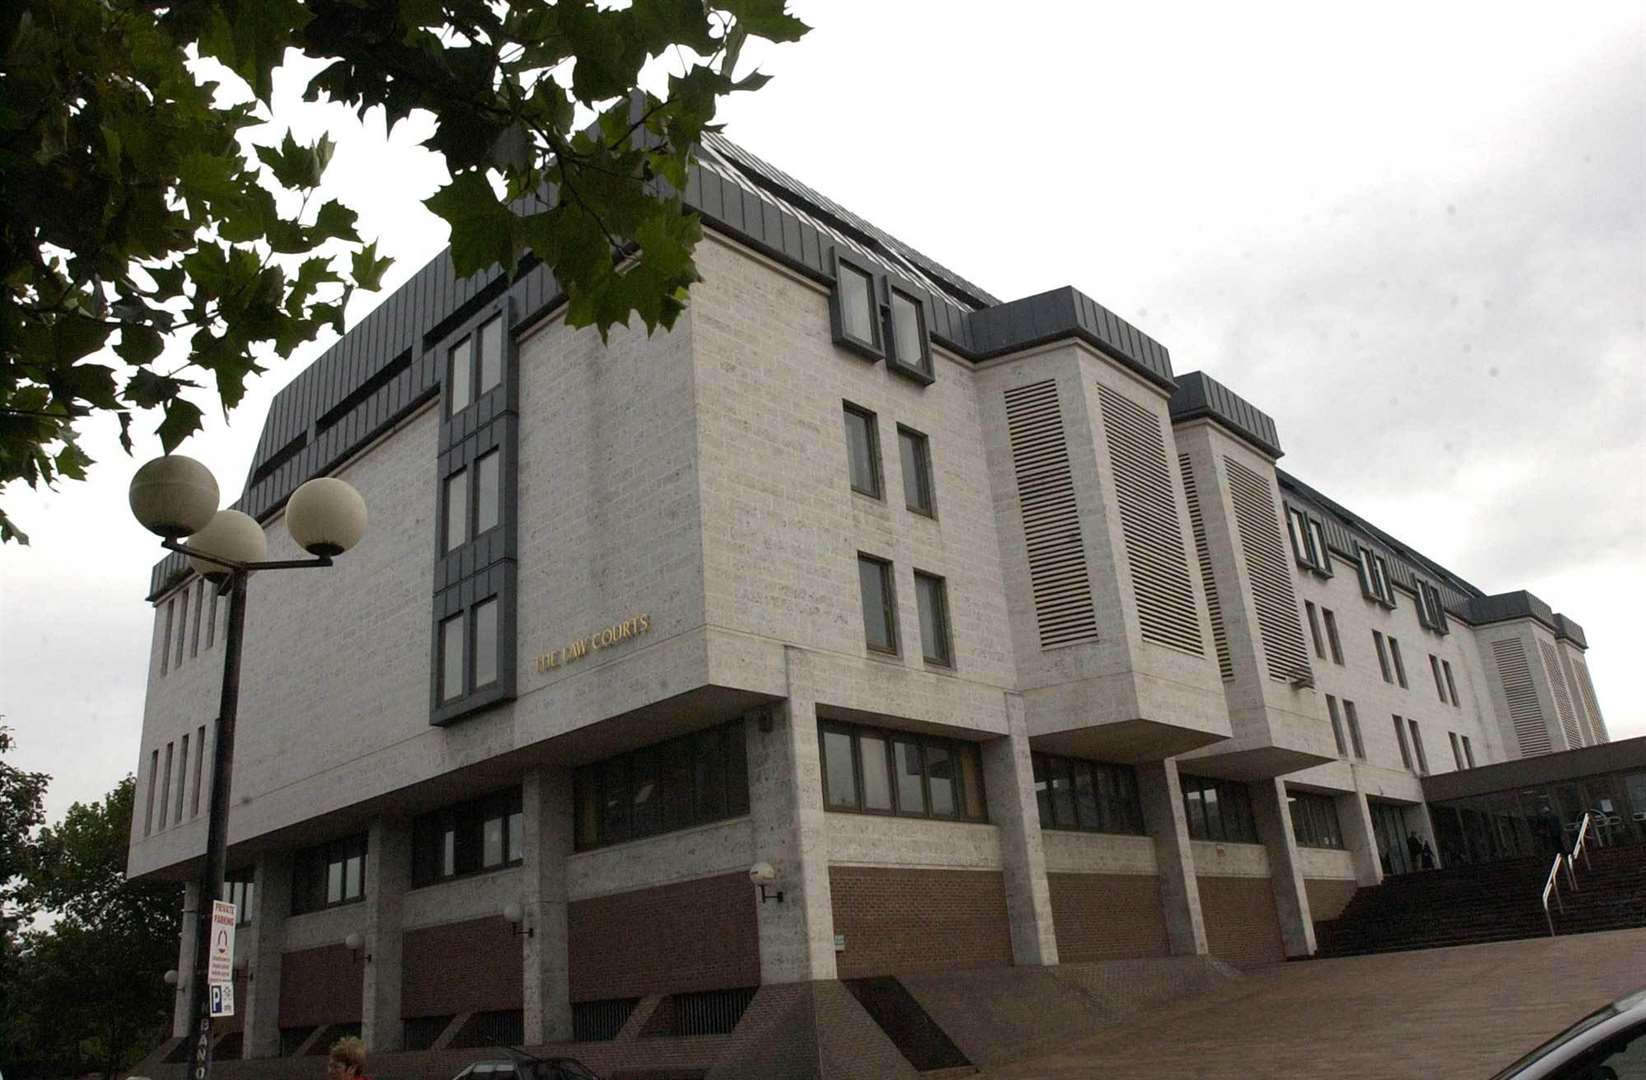 The trial was held at Maidstone Crown Court